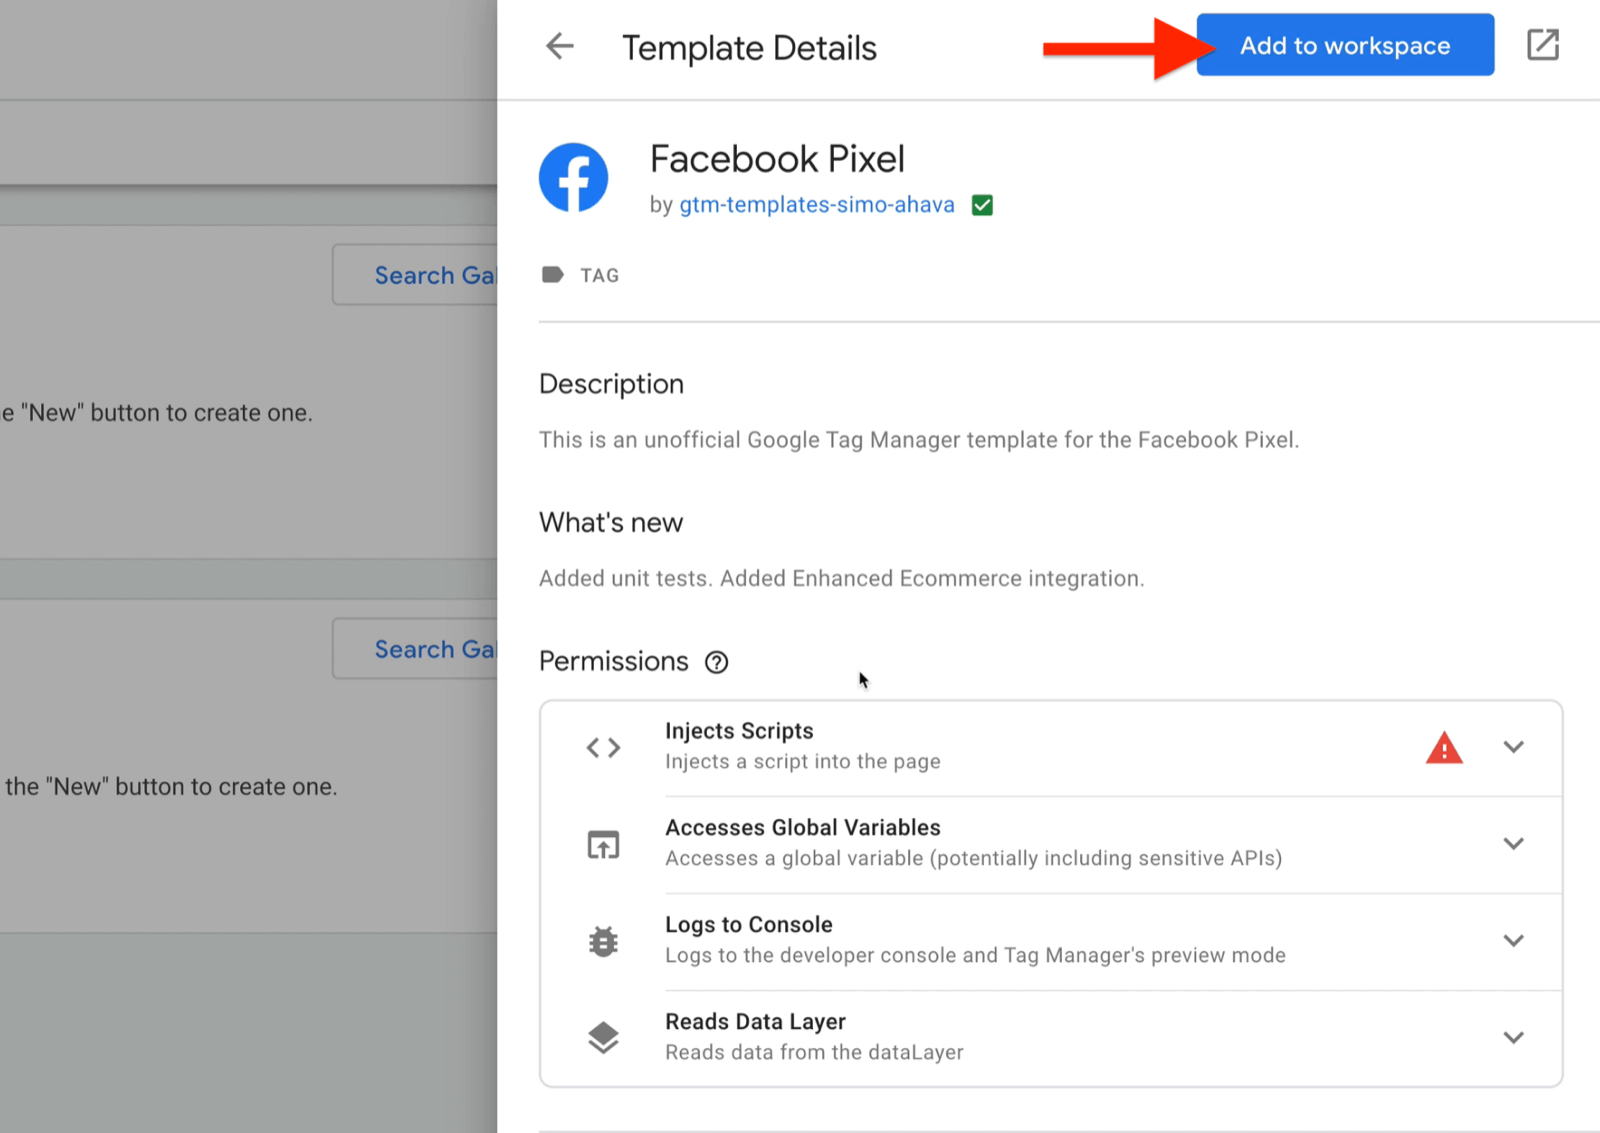 facebook pixel template details page with description, what's new, and permissions with add to workspace button highlighted